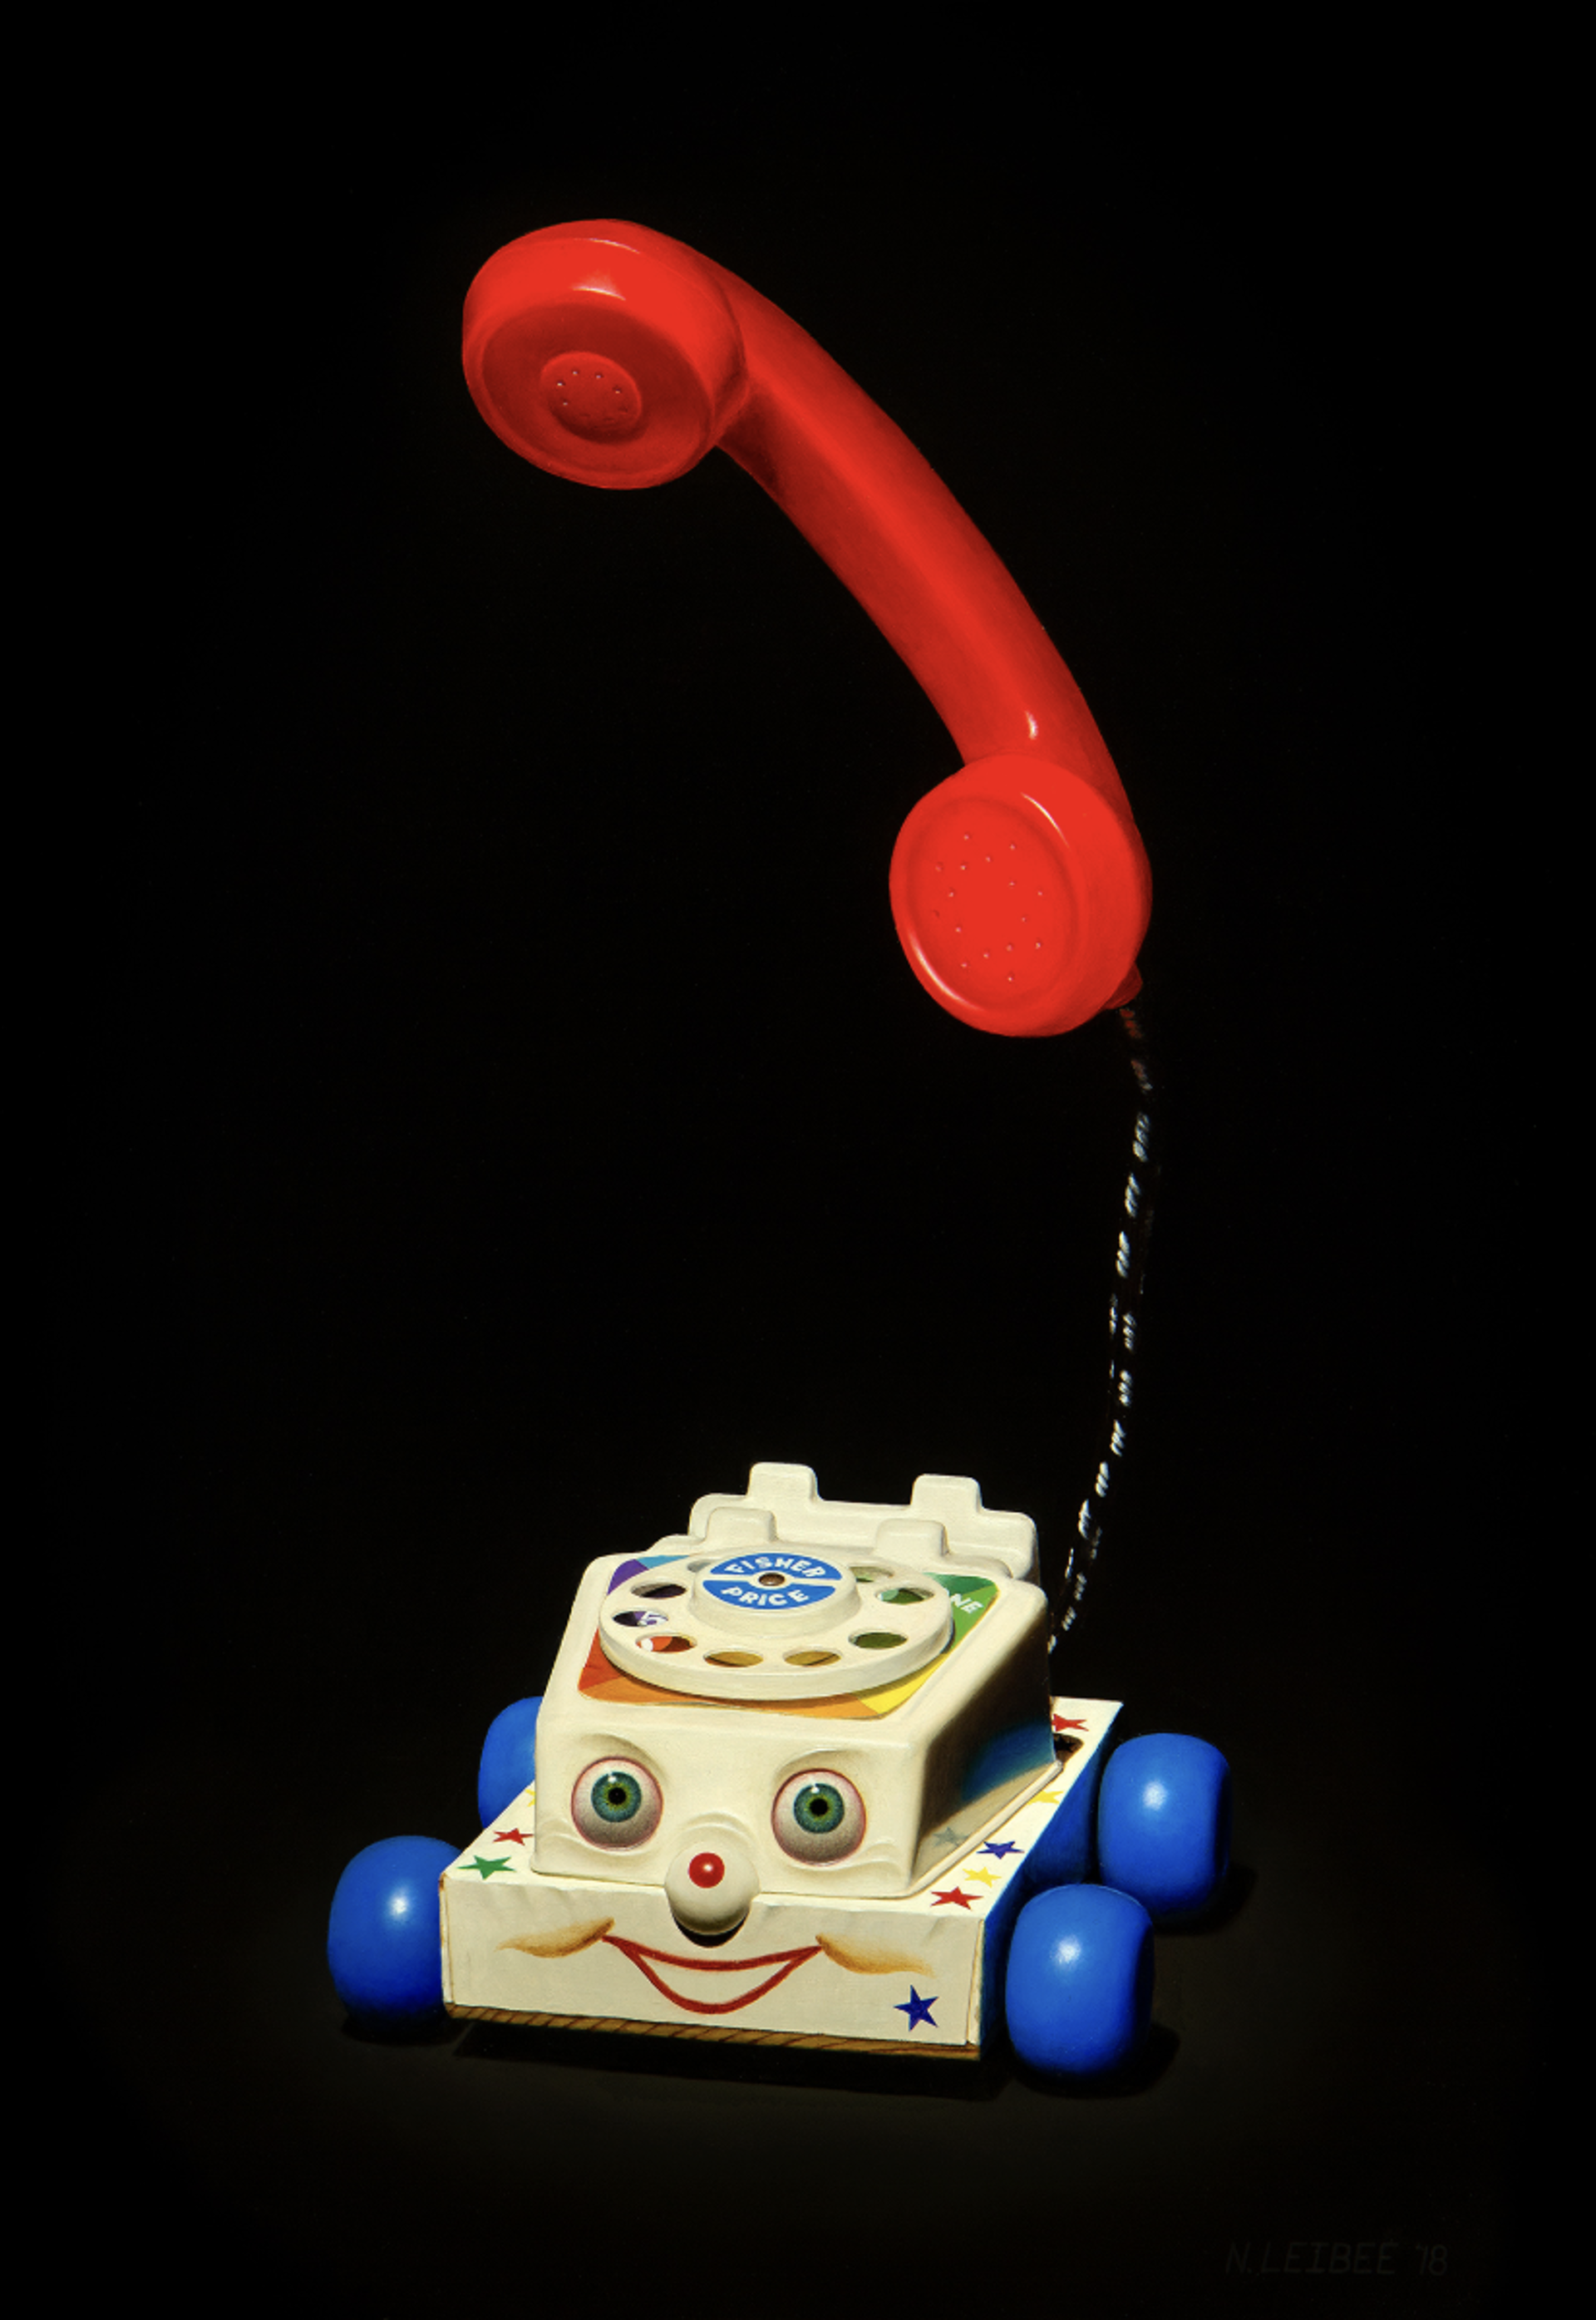 It's for You (Chatterphone) by Nick Leibee